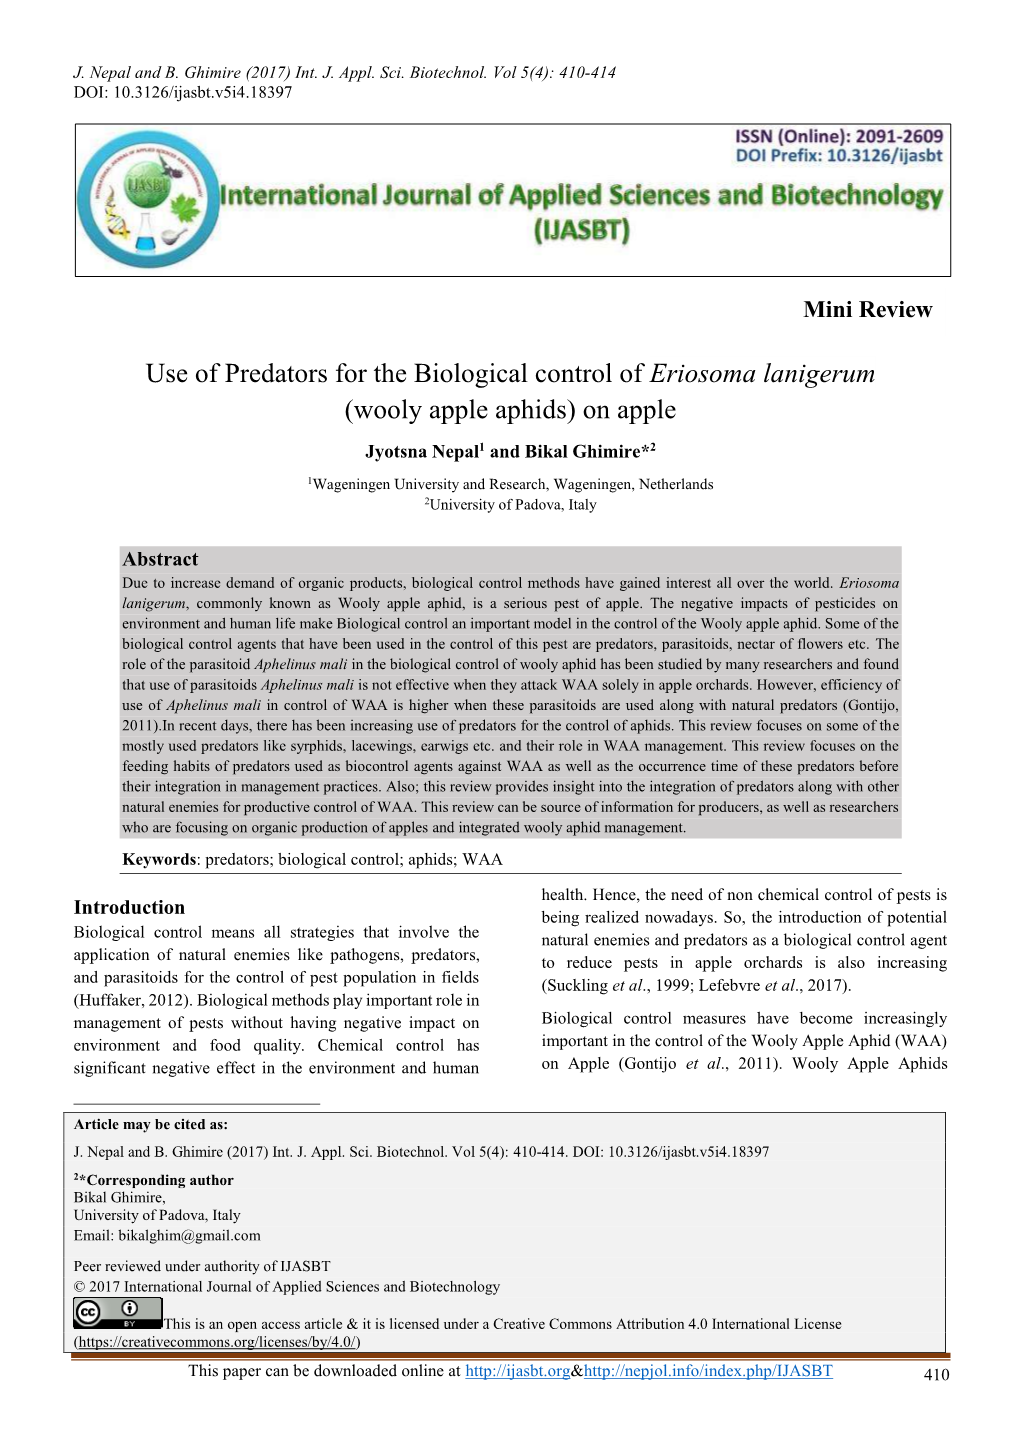 Use of Predators for the Biological Control of Eriosoma Lanigerum (Wooly Apple Aphids) on Apple Jyotsna Nepal1 and Bikal Ghimire*2